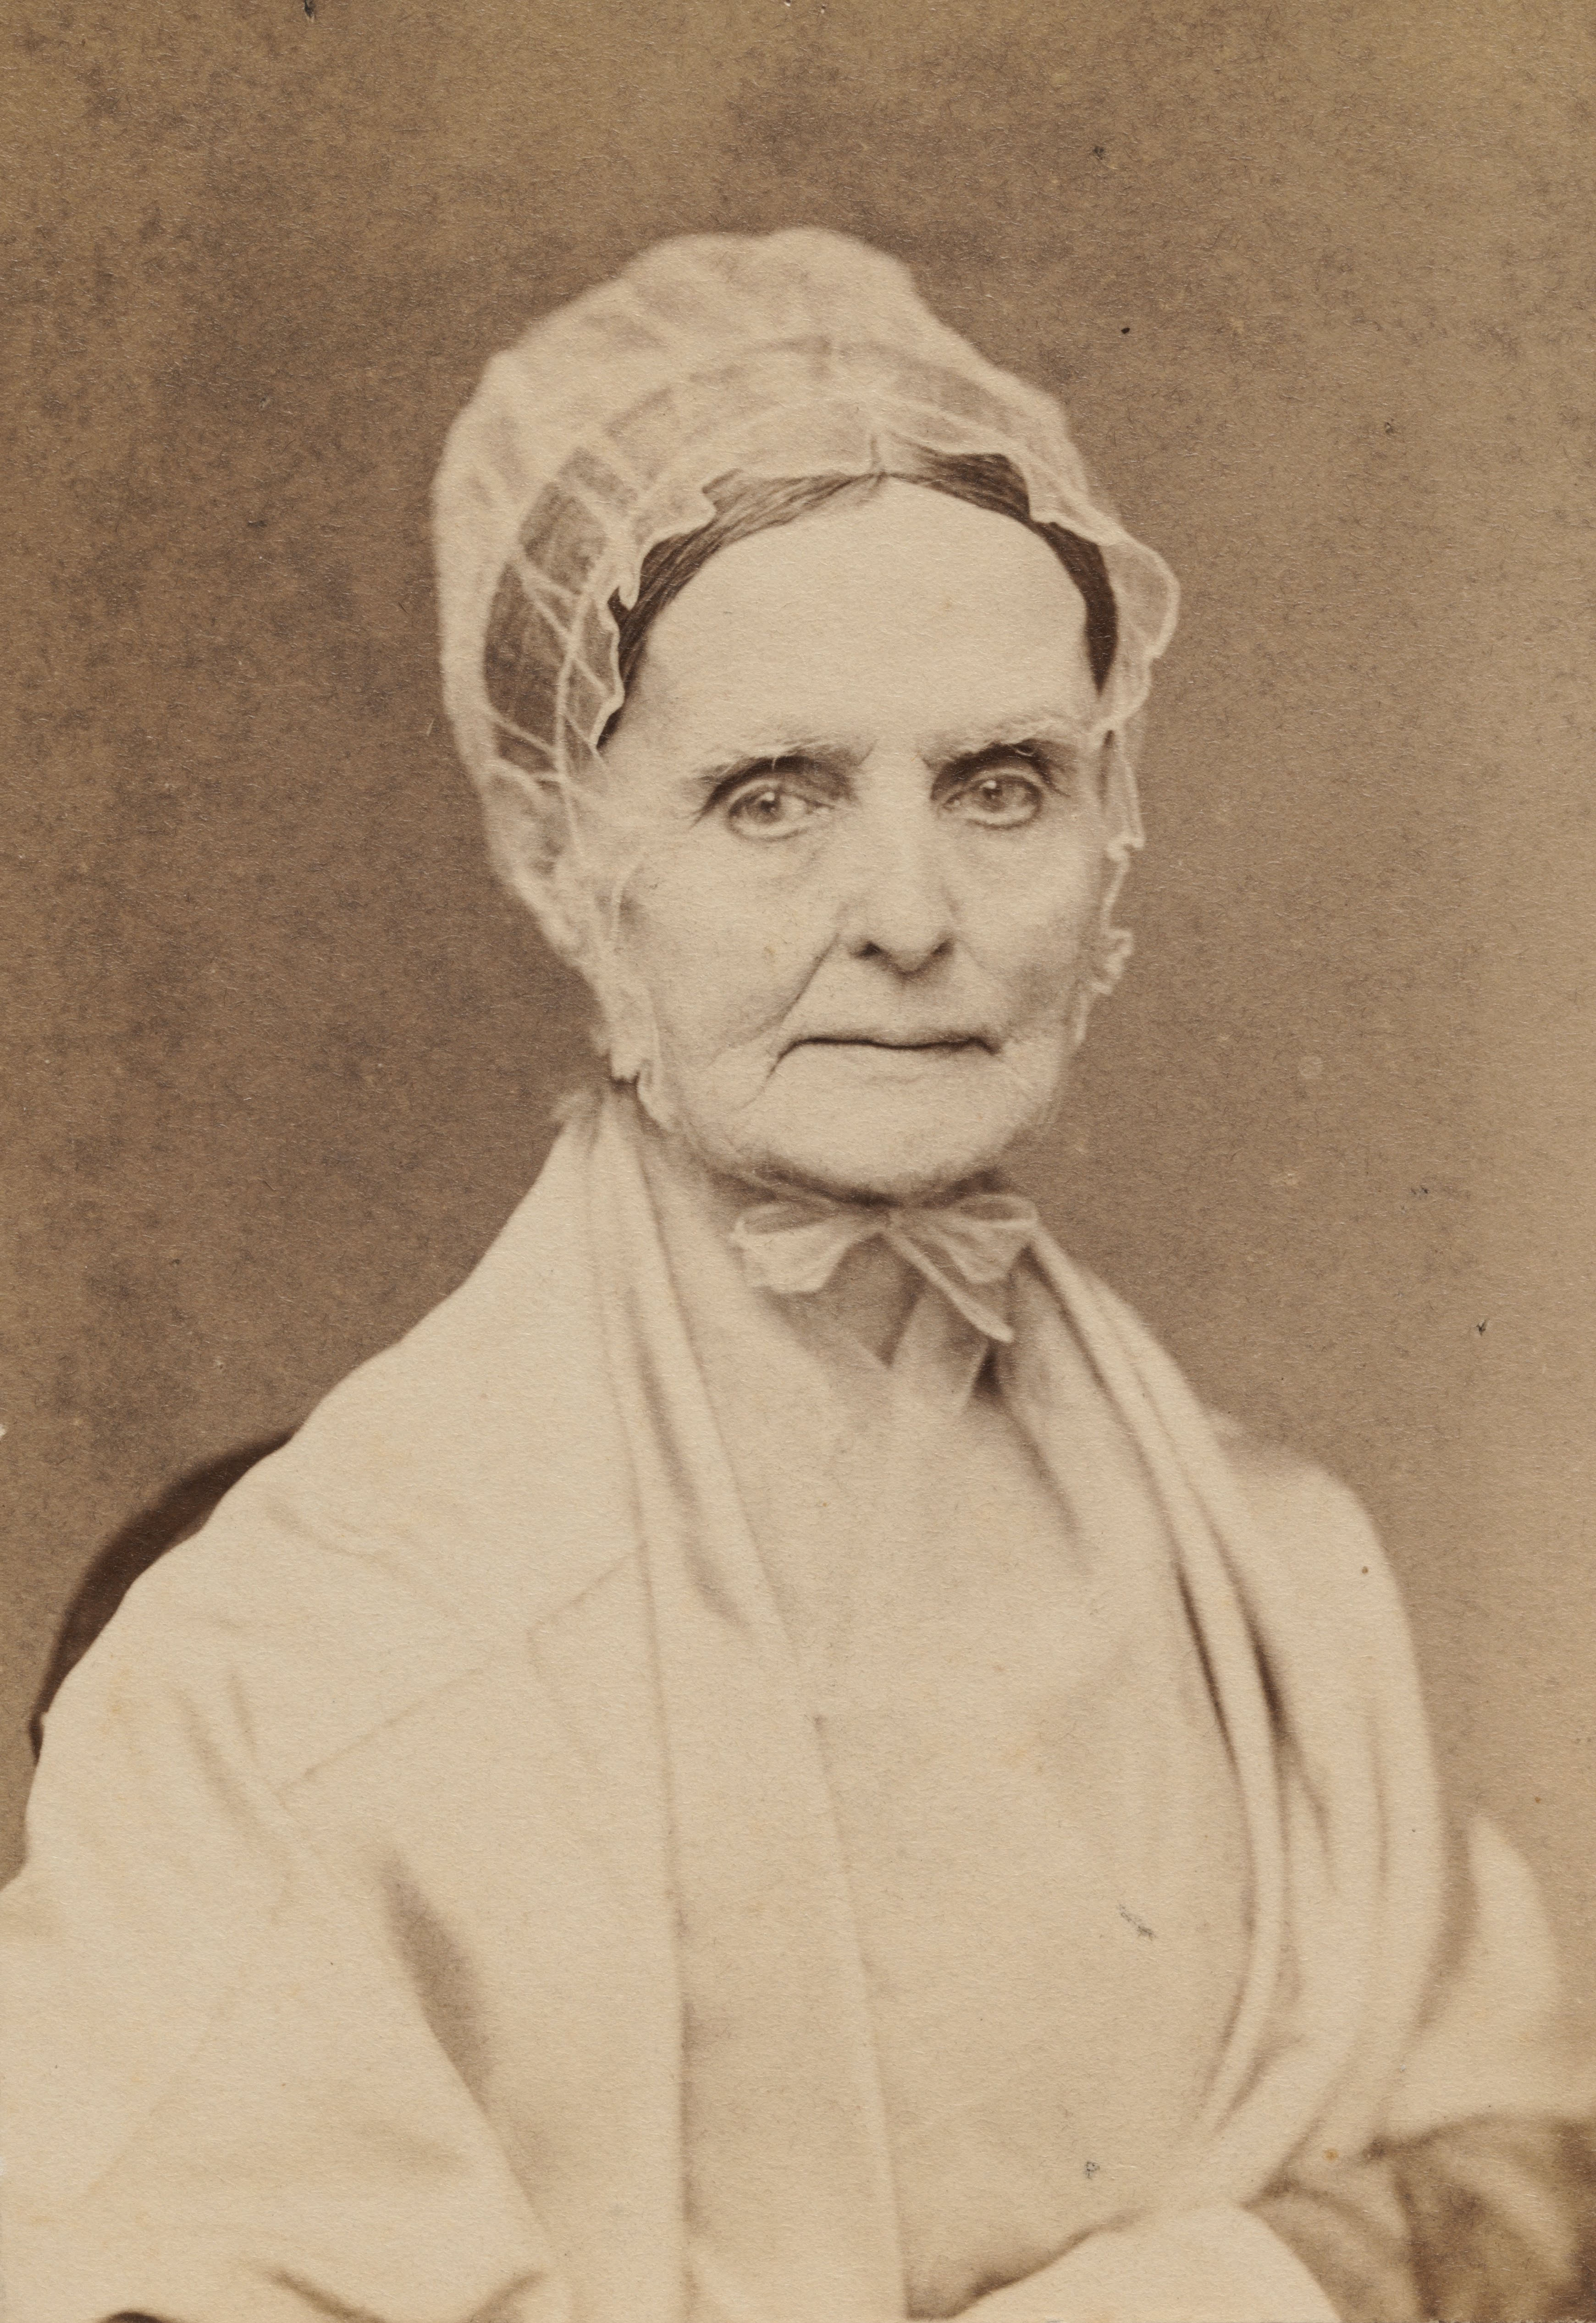 portrait photograph of an elderly woman wearing a bonnet, white sweater, and bow at the neck, facing the camera.